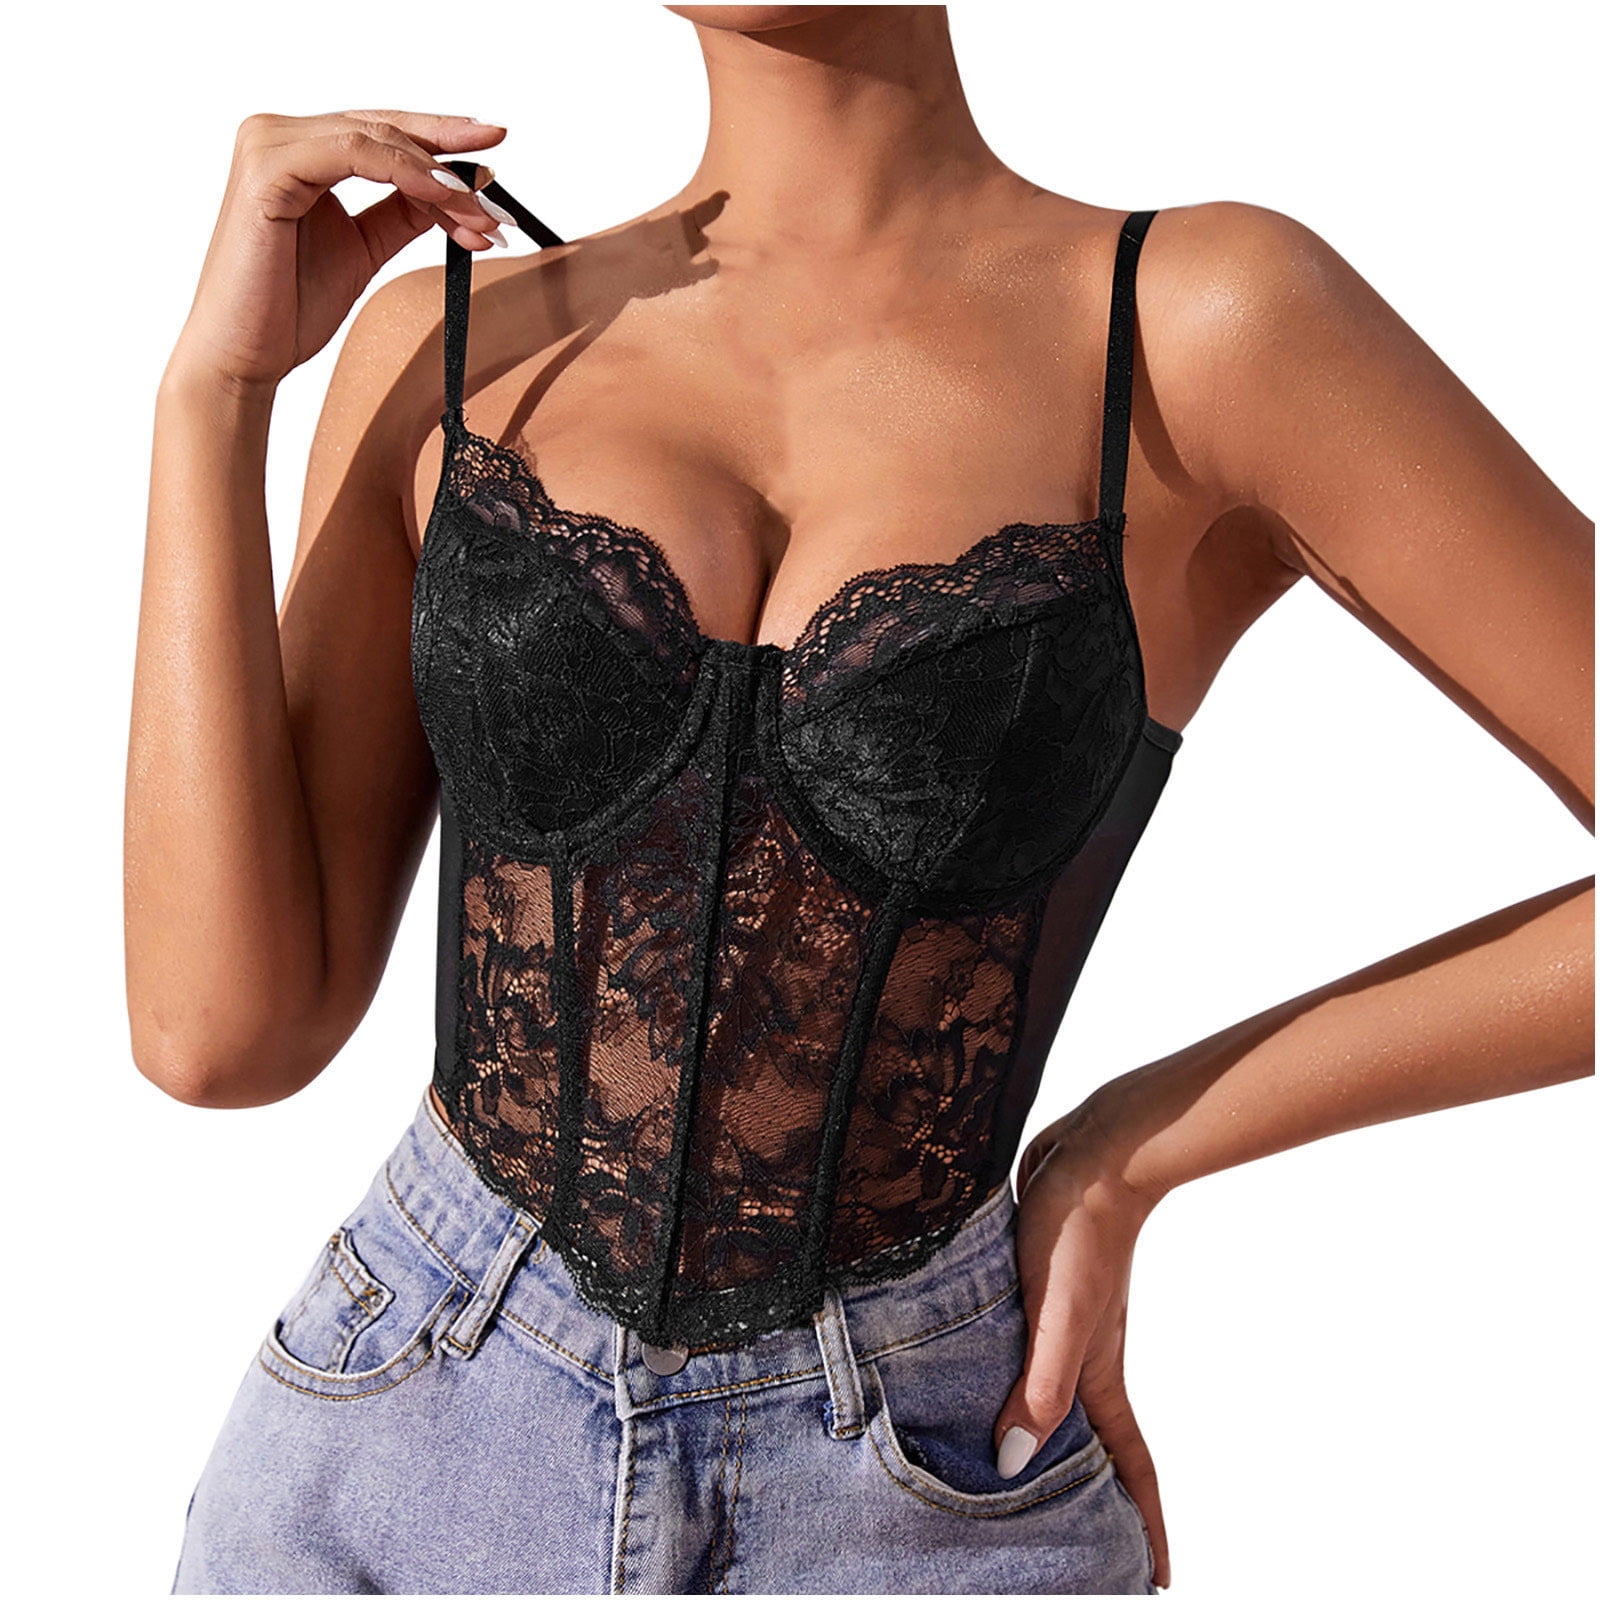  Lace Bustier Underwire Adjustable Spaghetti Straps Sleeveless  Corset Tank Top for Women  (Black,Small,Small,Women,Nylon,Female,Adult,Nylon,China,US,Alpha,Regular,Regular):  Clothing, Shoes & Jewelry